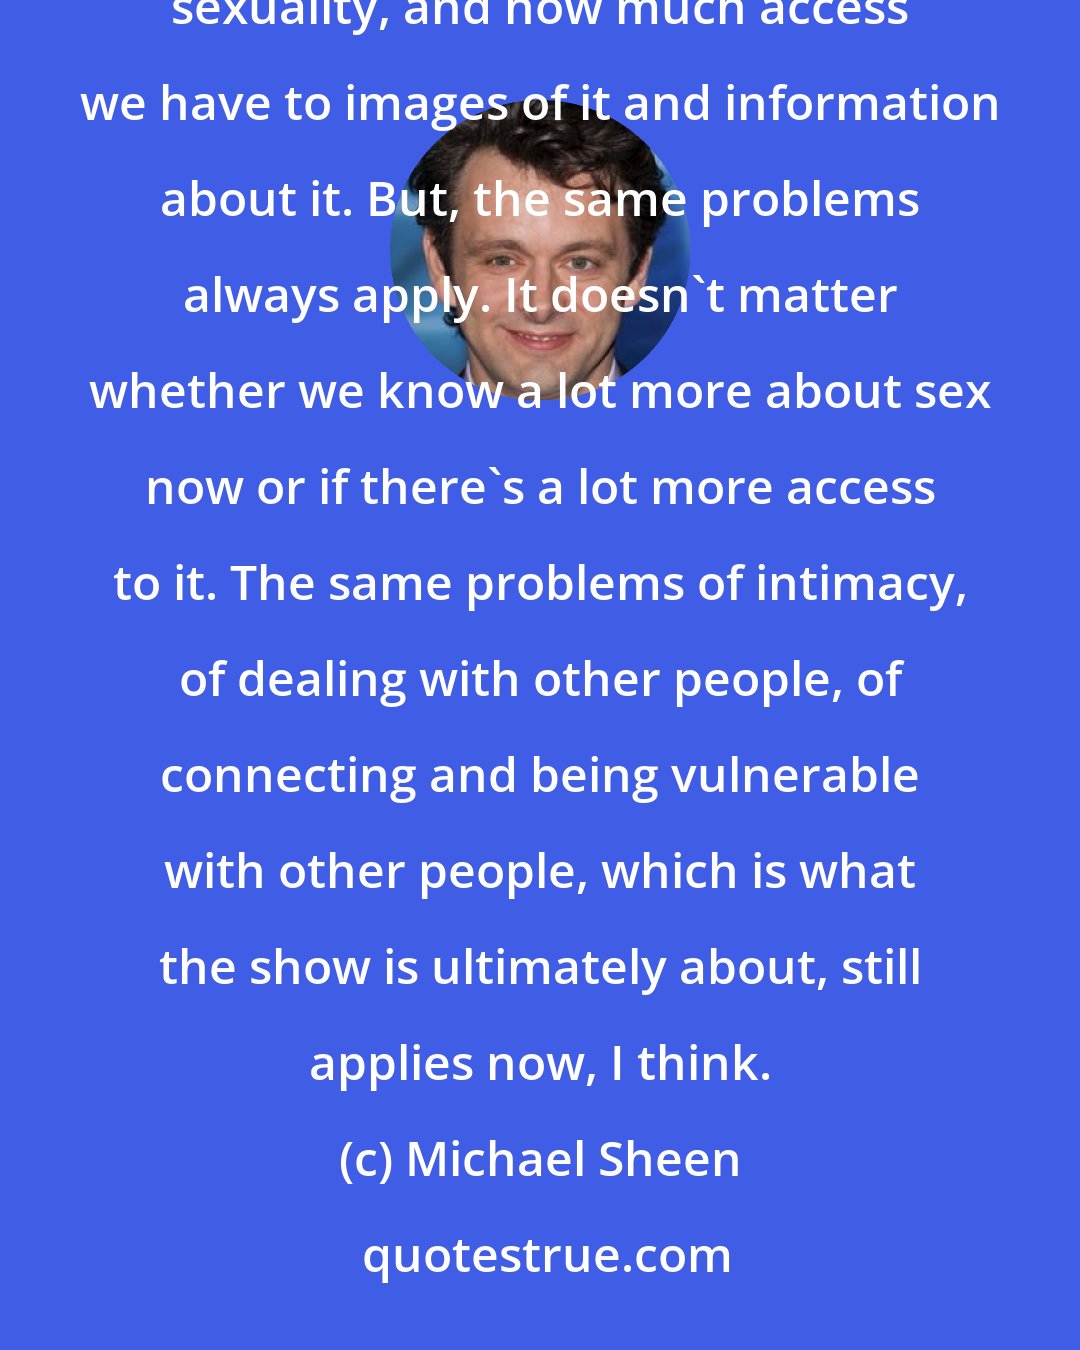 Michael Sheen: But obviously, things have changed in many ways since the '50s, when the show is started, in terms of sexuality, and how much access we have to images of it and information about it. But, the same problems always apply. It doesn't matter whether we know a lot more about sex now or if there's a lot more access to it. The same problems of intimacy, of dealing with other people, of connecting and being vulnerable with other people, which is what the show is ultimately about, still applies now, I think.